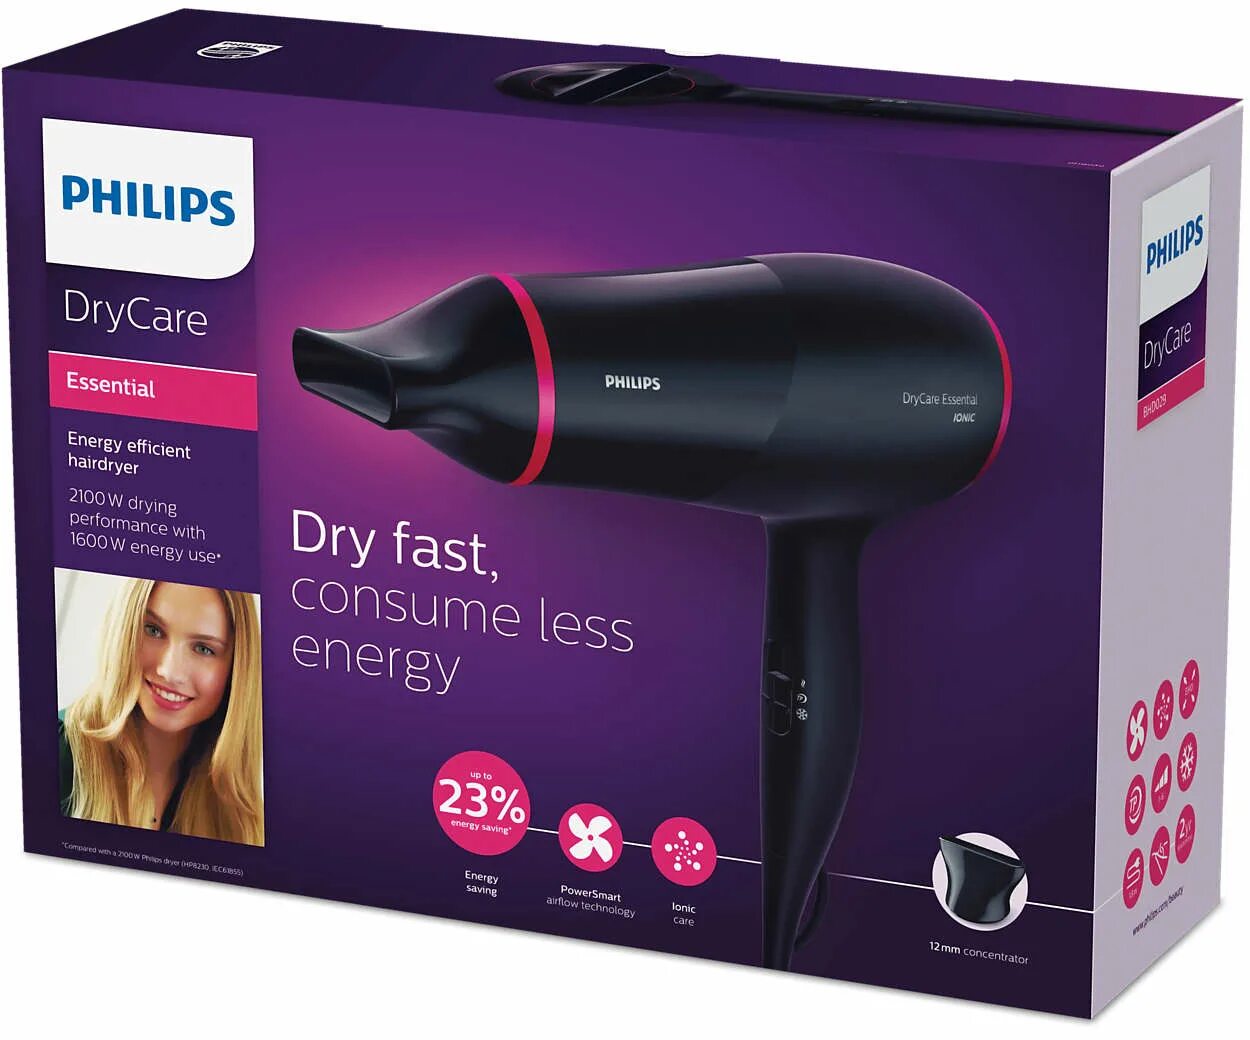 Philips bhd029 DRYCARE Essential. Фен Philips bhd029 DRYCARE Essential. Фен Philips bhd027 DRYCARE Essential. Фен Philips bhd030/00. Описание филипс